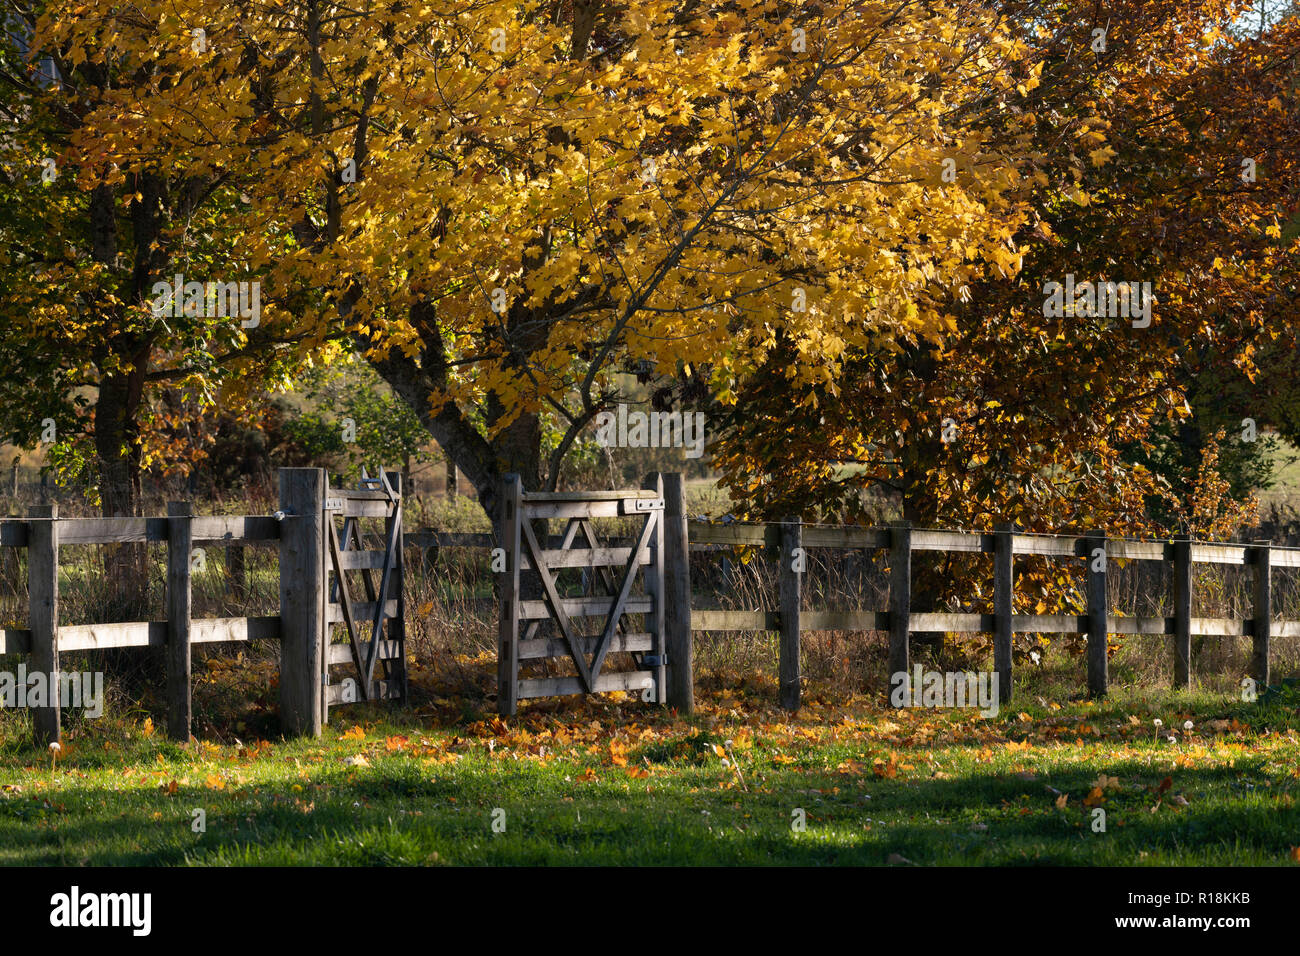 A Line of Trees Alongside a Wooden Post and Rail Fence in Autumn Stock Photo